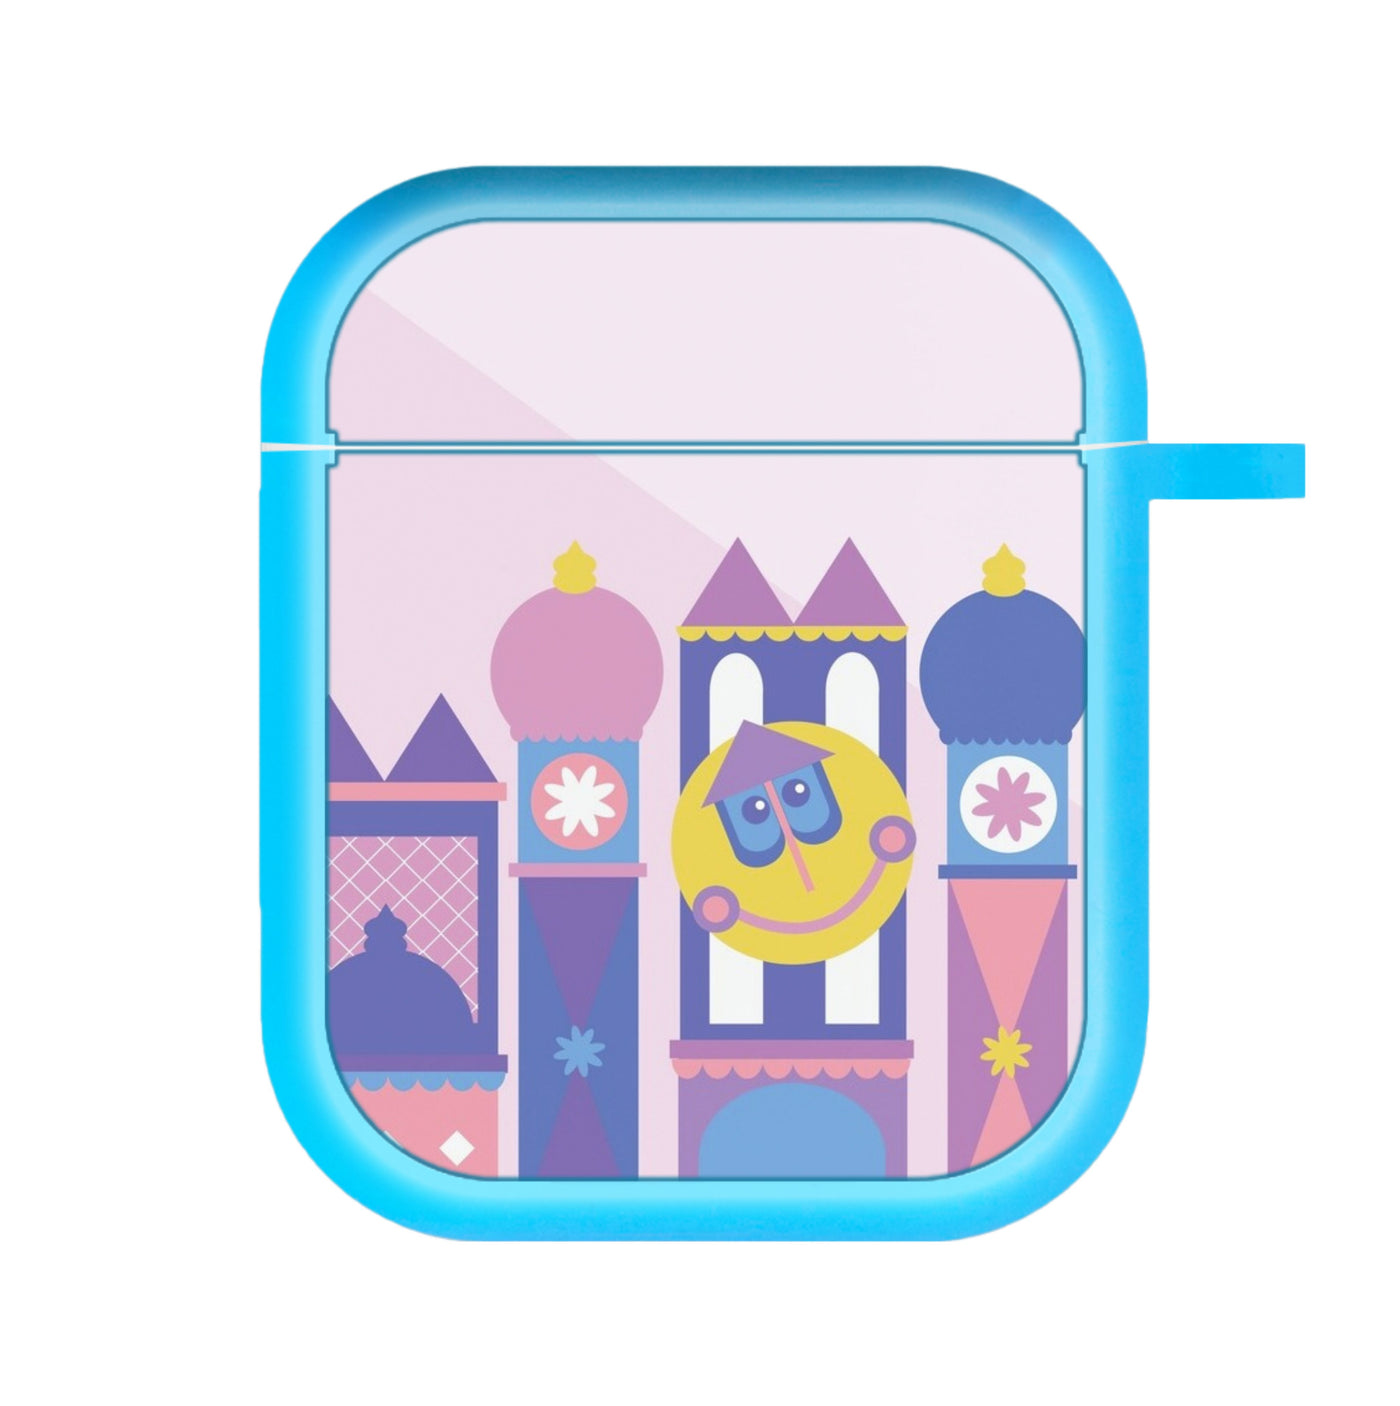 It's A Small World - Disney AirPods Case